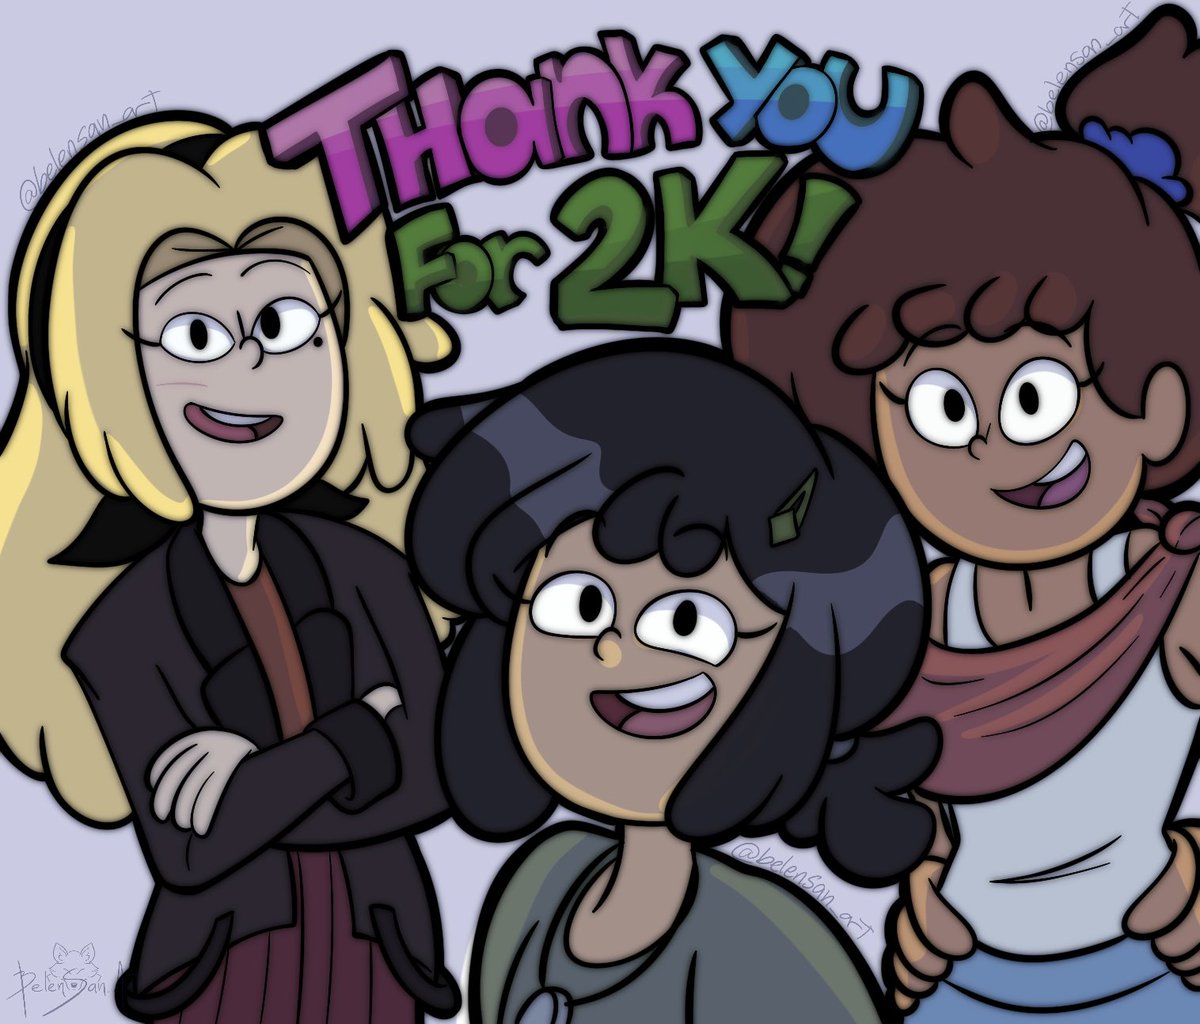 Guys! GUYS! WE HIT 2K ON TWITTER! Gosh, thank you so much for all your support, If it weren't for you I’d never have made it! I hope to bring more content and have fun with you! 
💖💚🩵! Take care and see you around #amphibia #sashannarcy #amphibiafanart